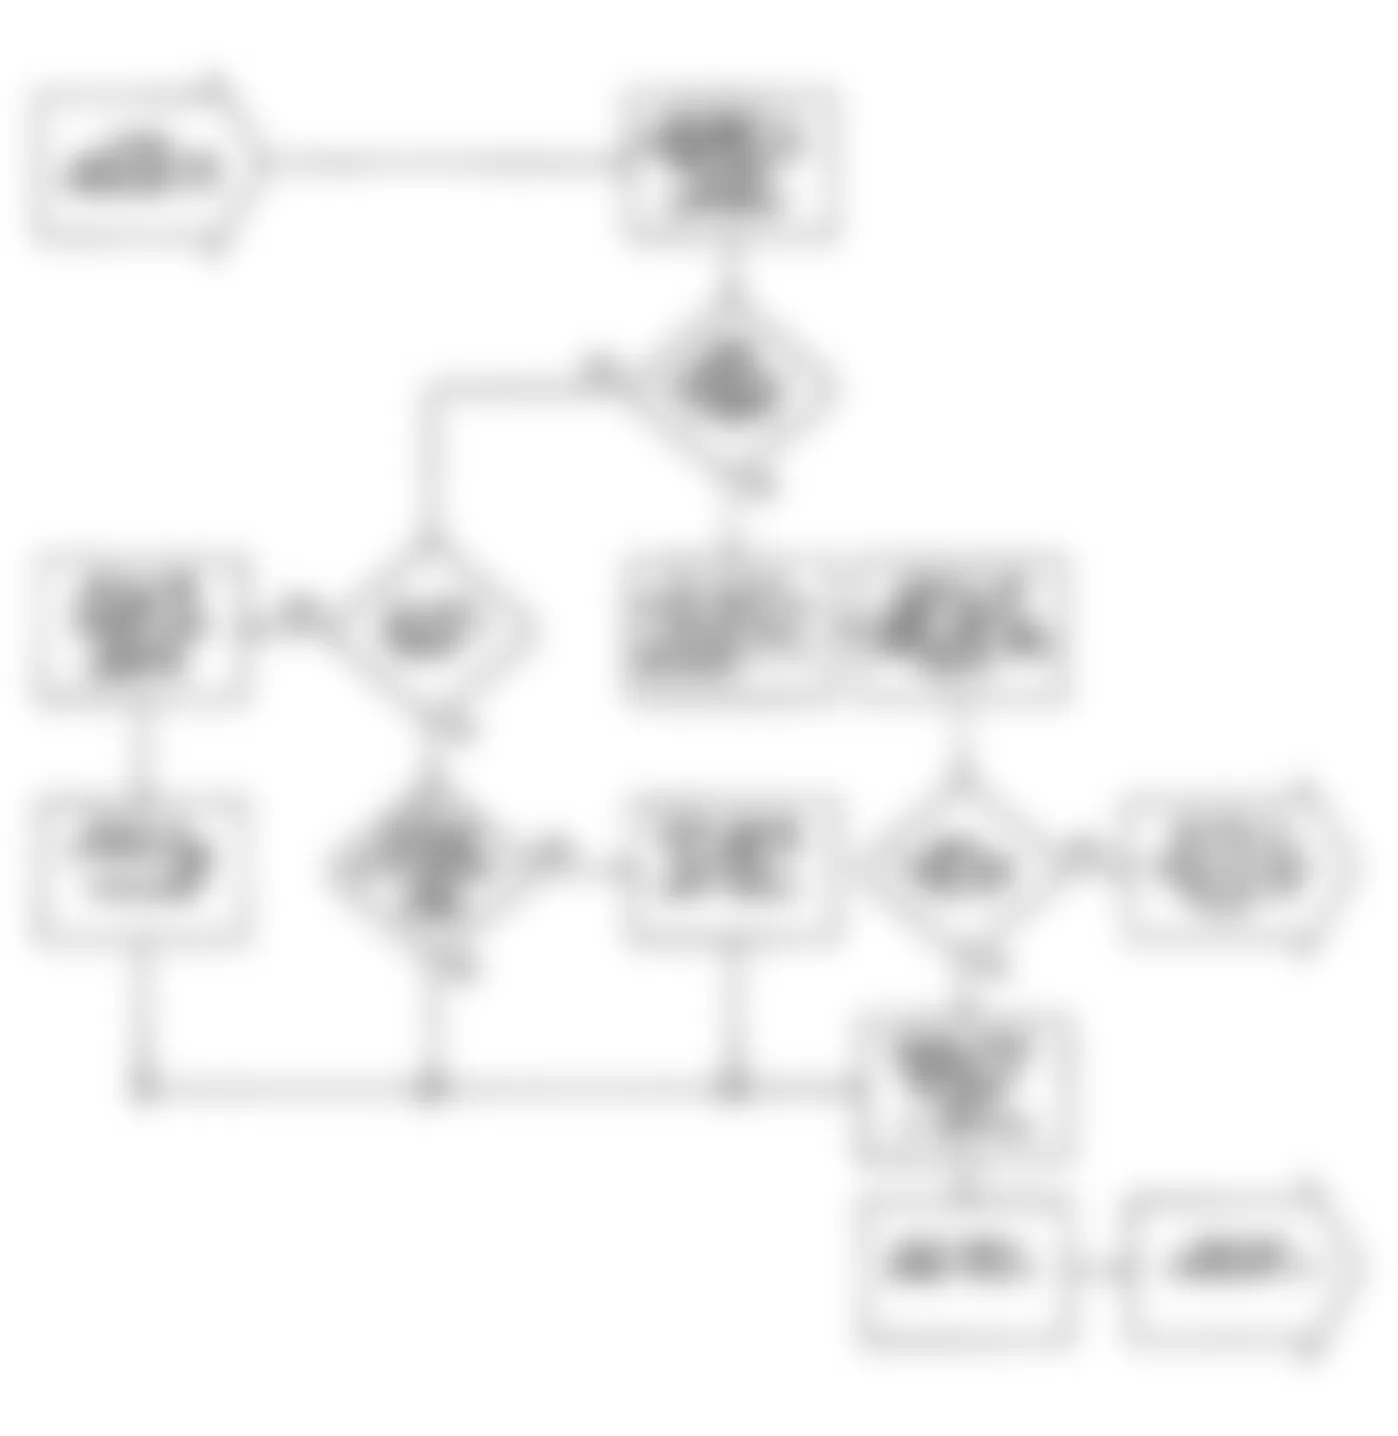 Chrysler LeBaron GTC 1990 - Component Locations -  VER-2: Flow Chart (1 of 2)